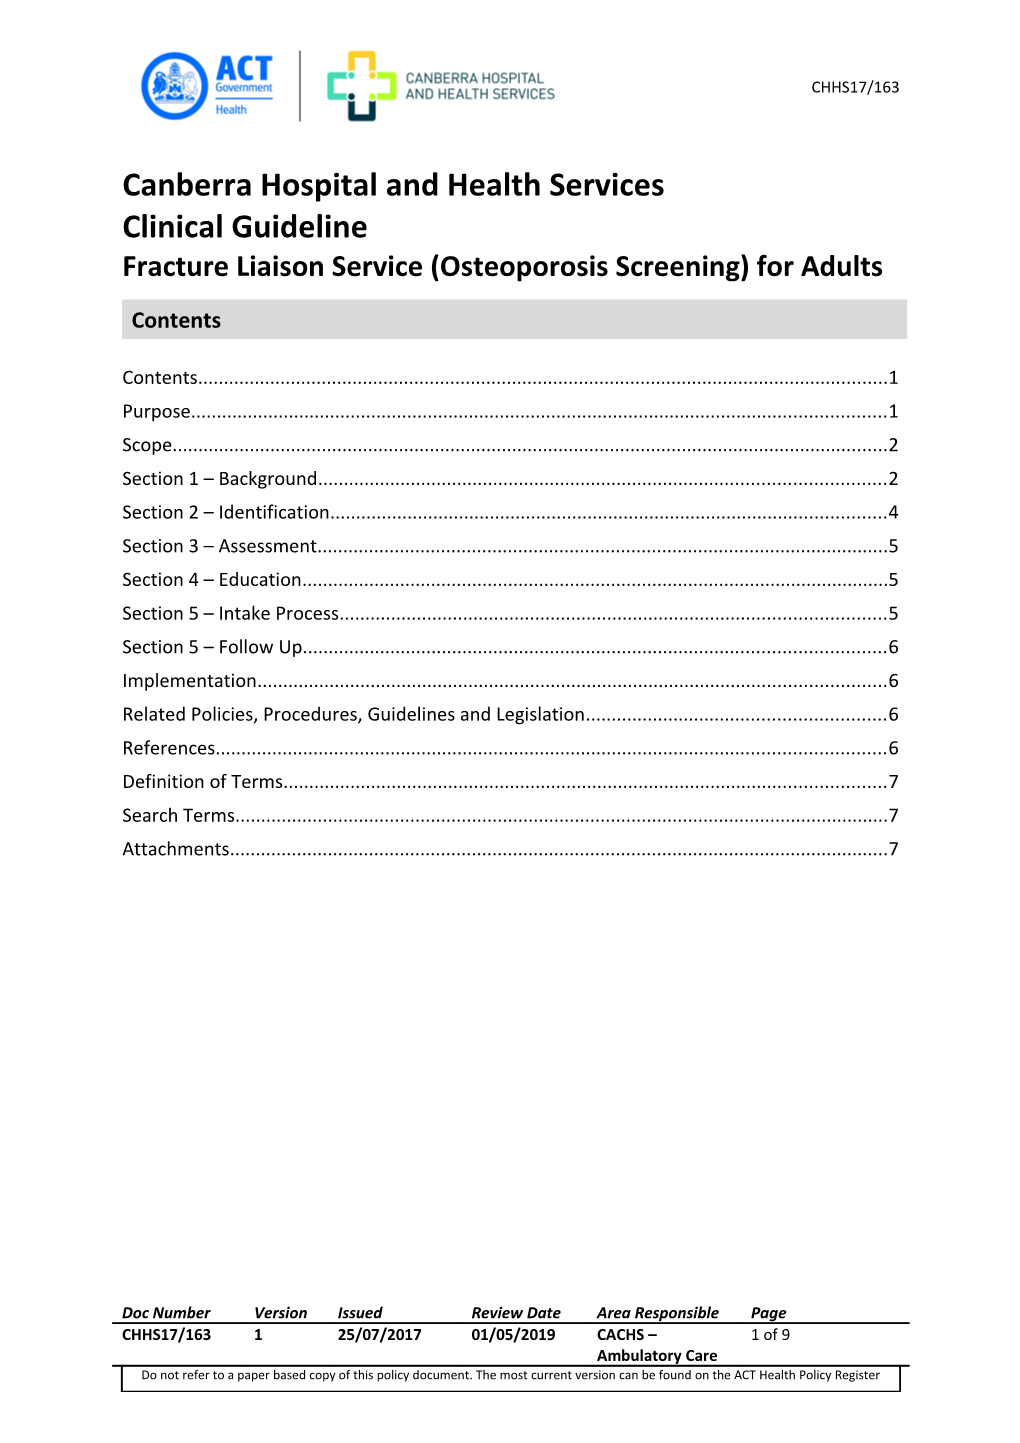 Fracture Liaison Service (Osteoporosis Screening) for Adults